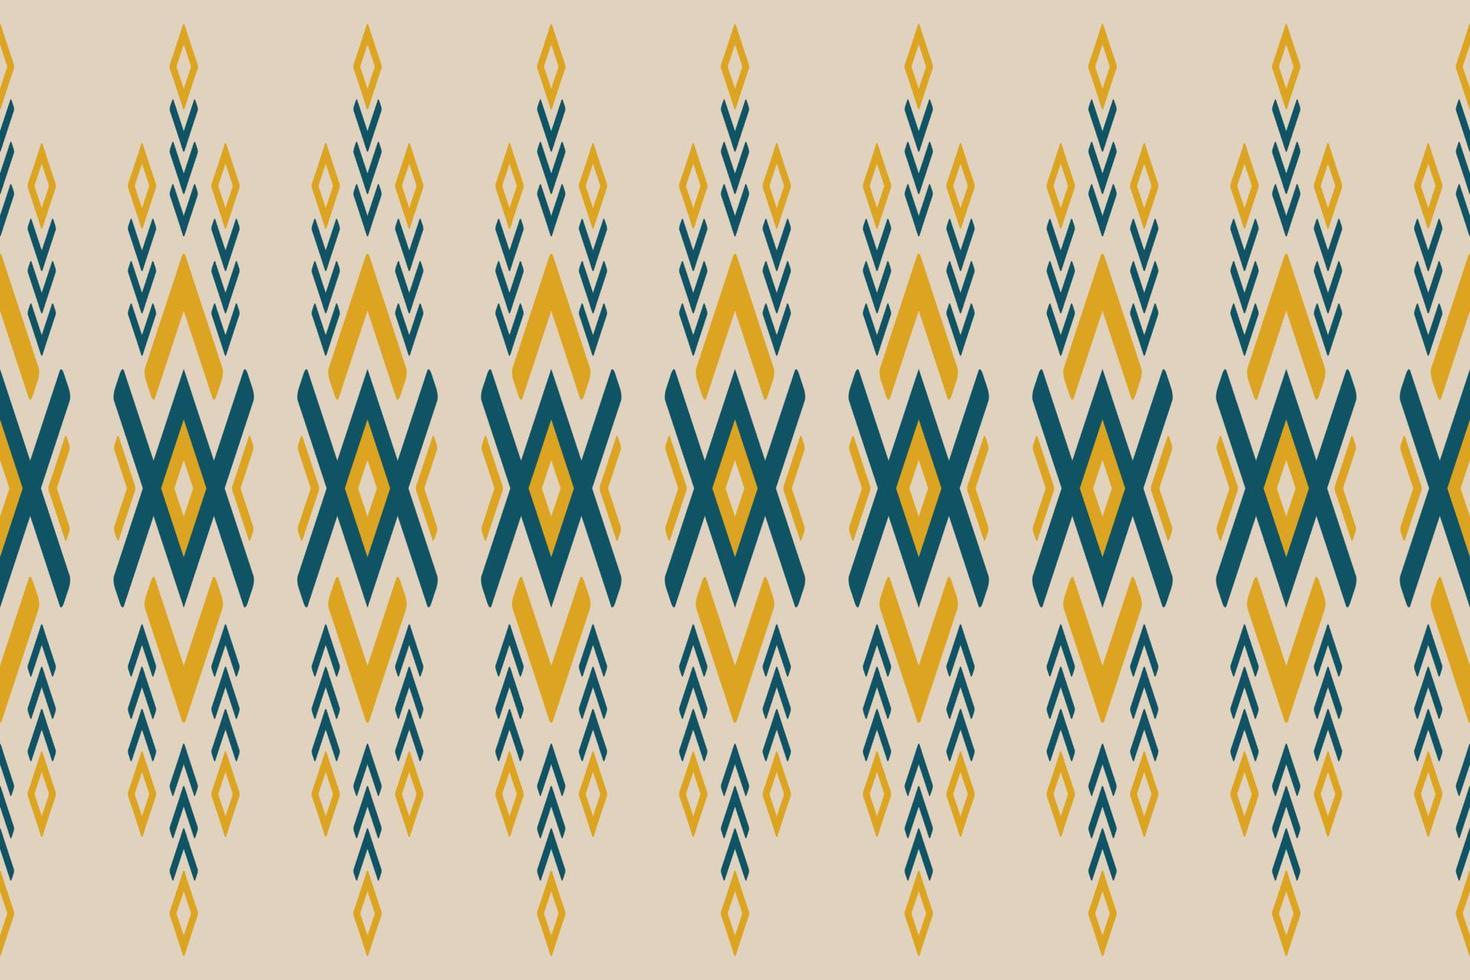 Geometric ethnic seamless pattern traditional. American, Mexican style. Design for background, wallpaper, vector illustration, fabric, clothing, carpet, textile, batik, embroidery.